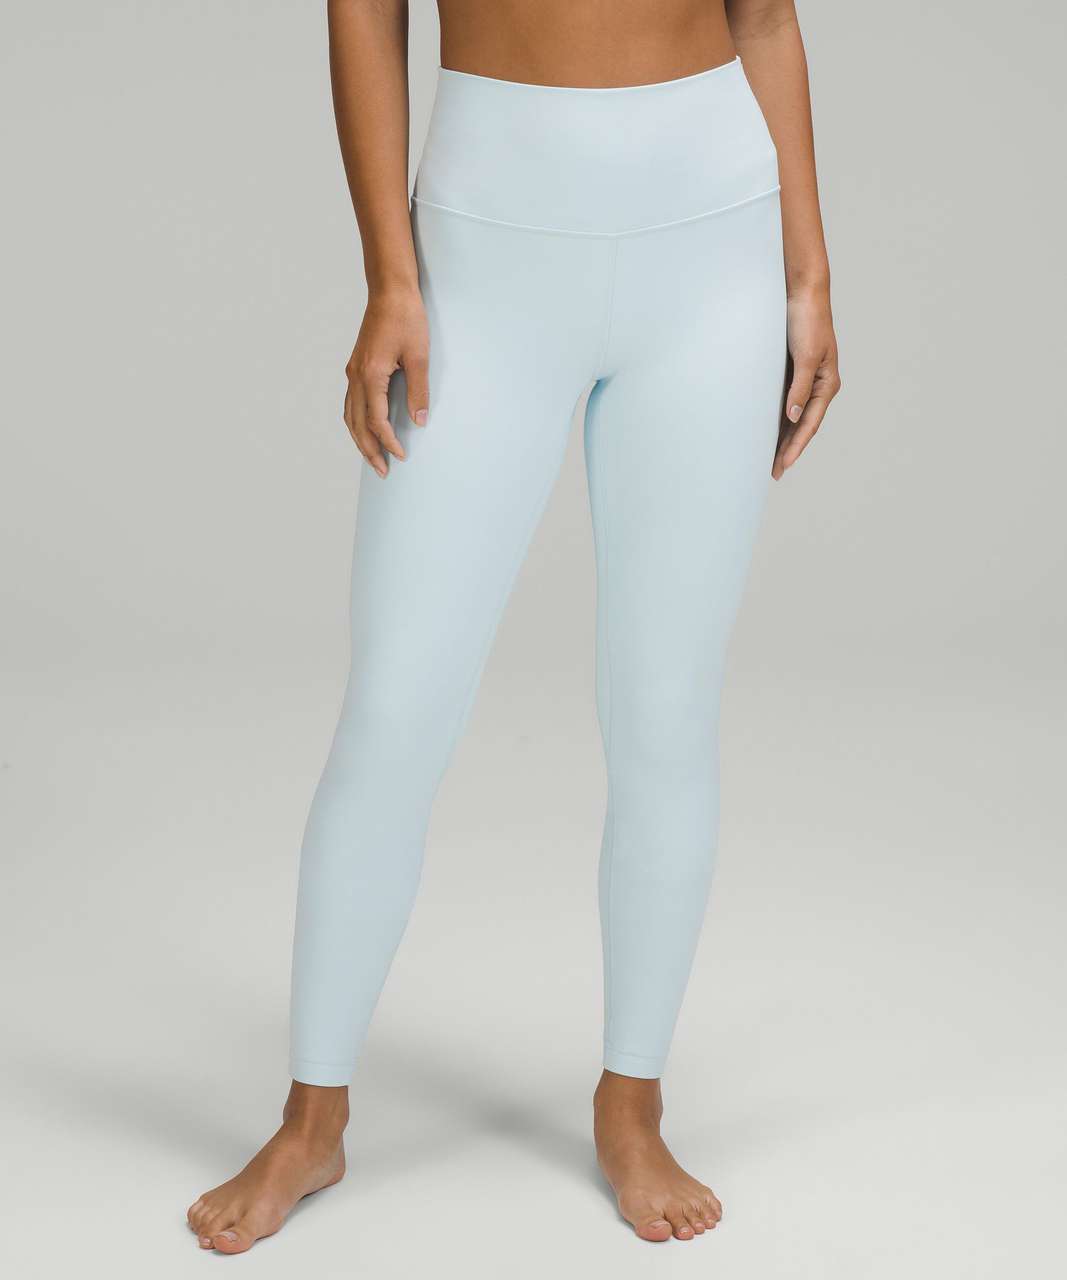 Lululemon 28” Align Leggings Utility Blue Size 6 - $40 (59% Off Retail) -  From Mary